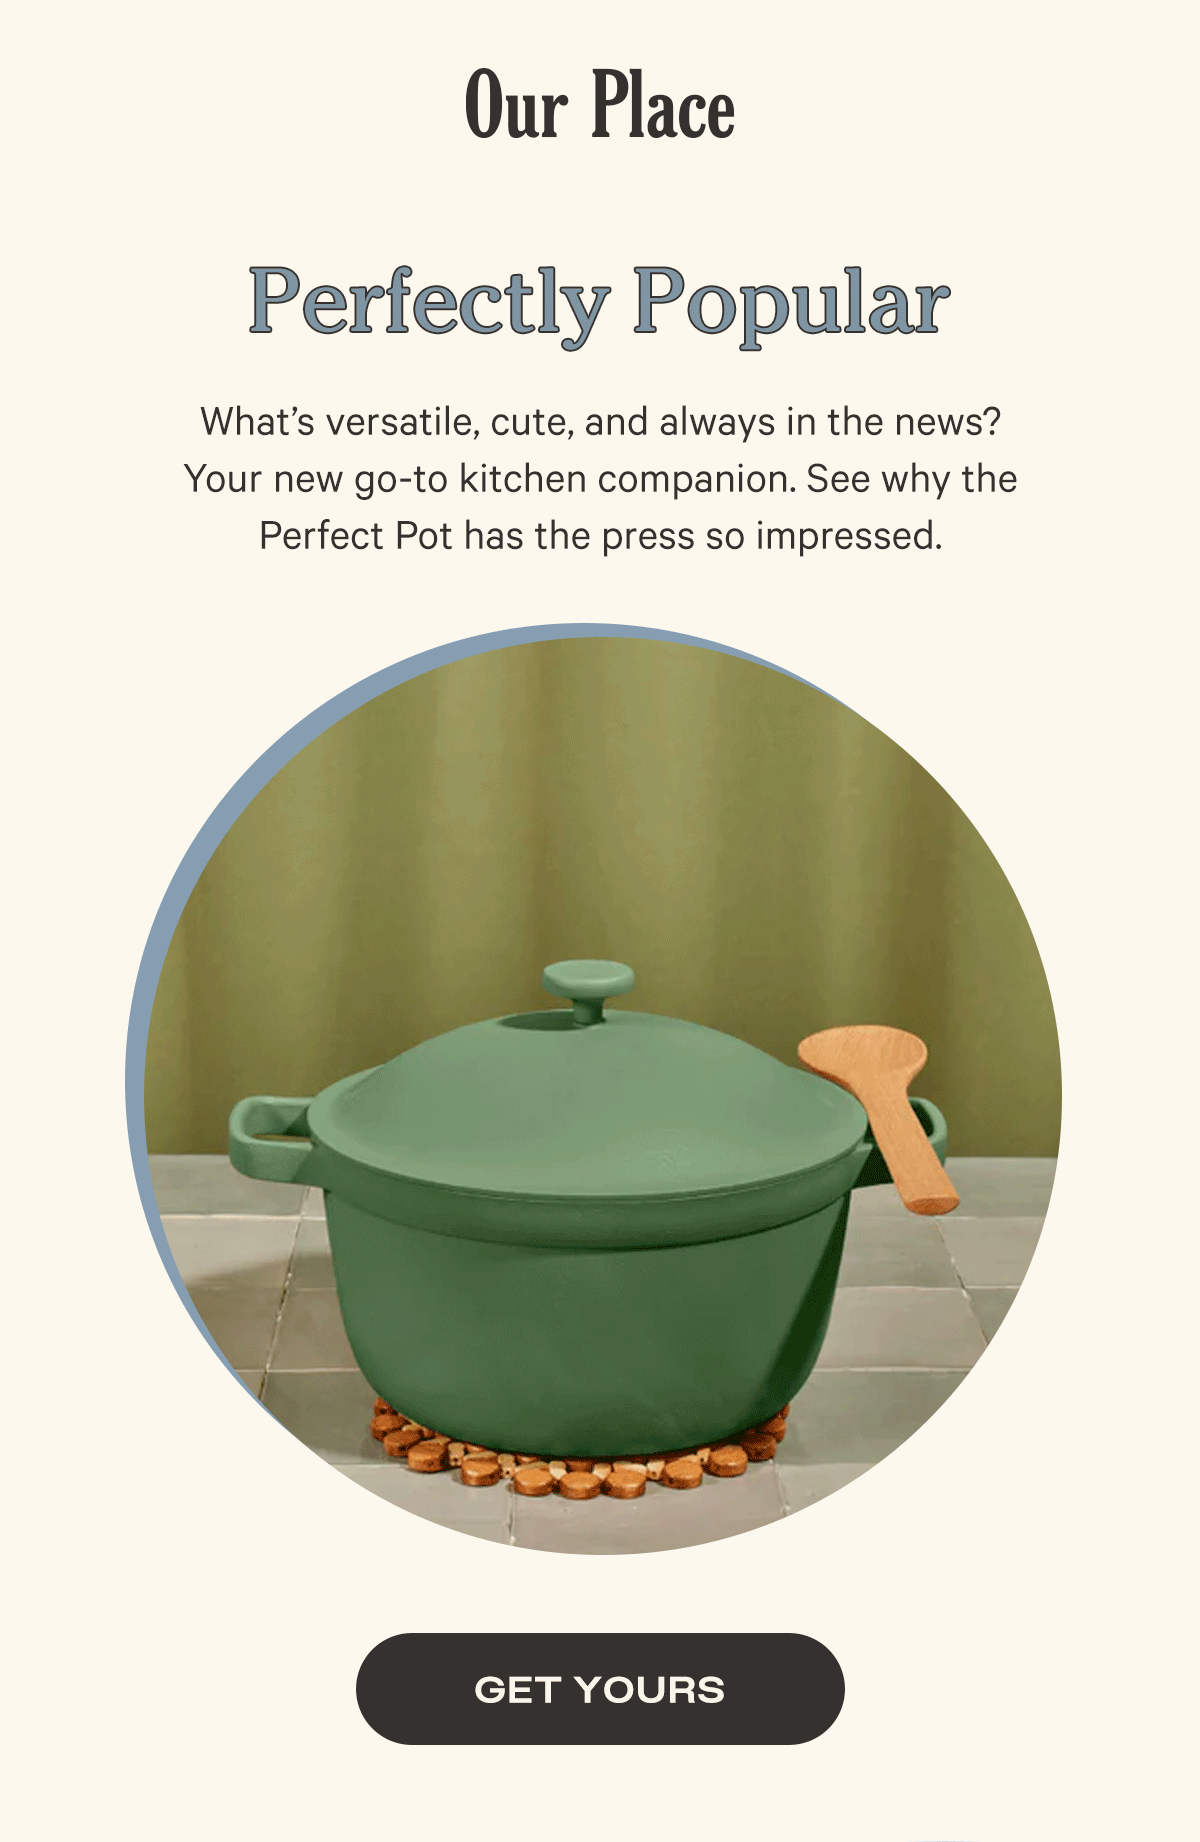 Our Place - The Perfect Pot - Just what makes the Perfect Pot so *perfect*? We break it down for you: